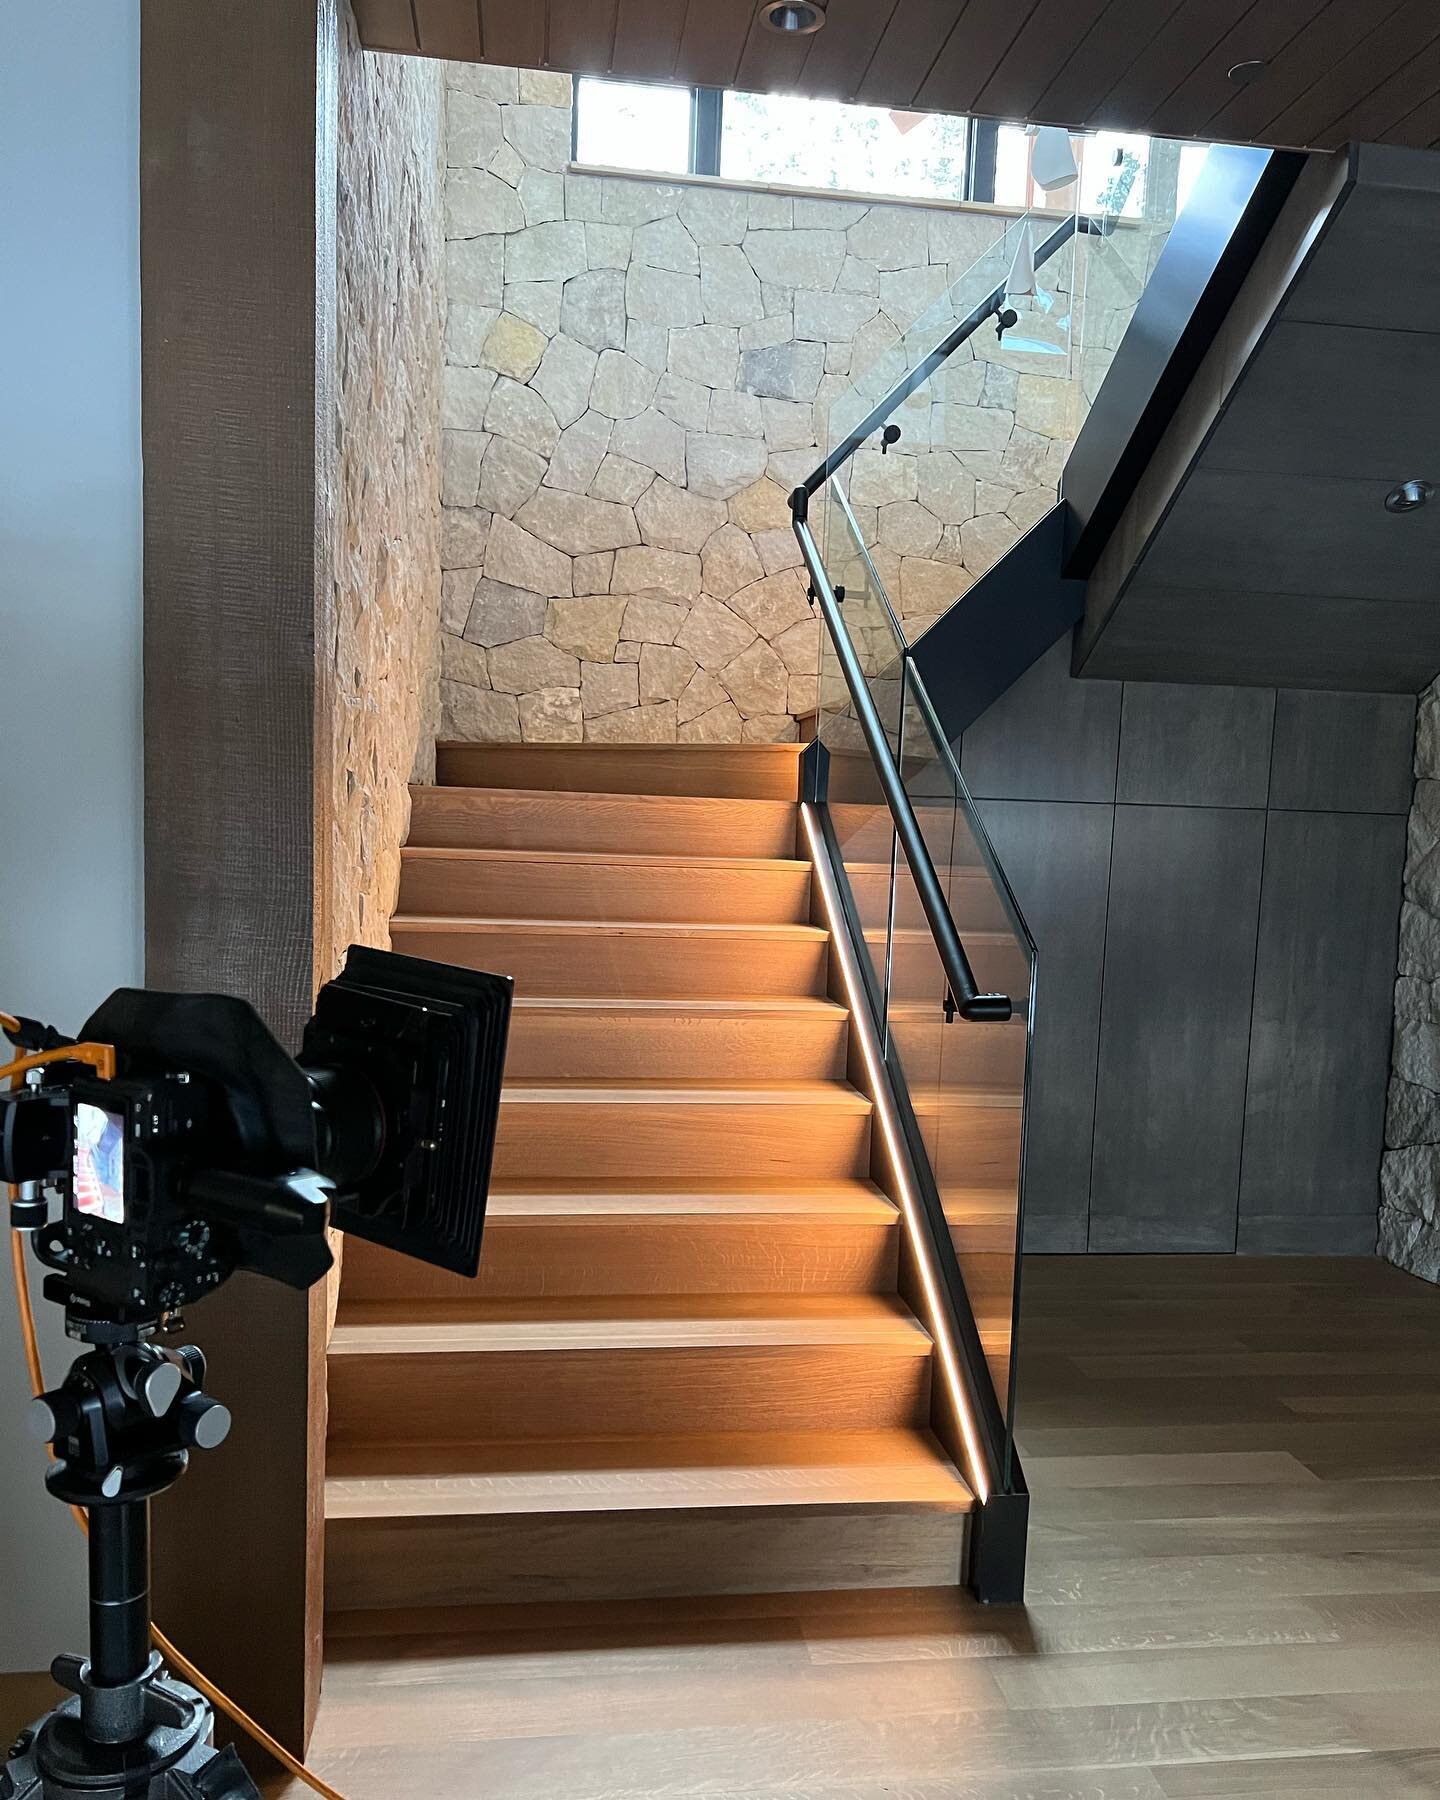 Wrapped up another day of shooting!  The light was great and I think we got some amazing photos of a fantastic project.  Many thanks to @davidpatterson and our clients!